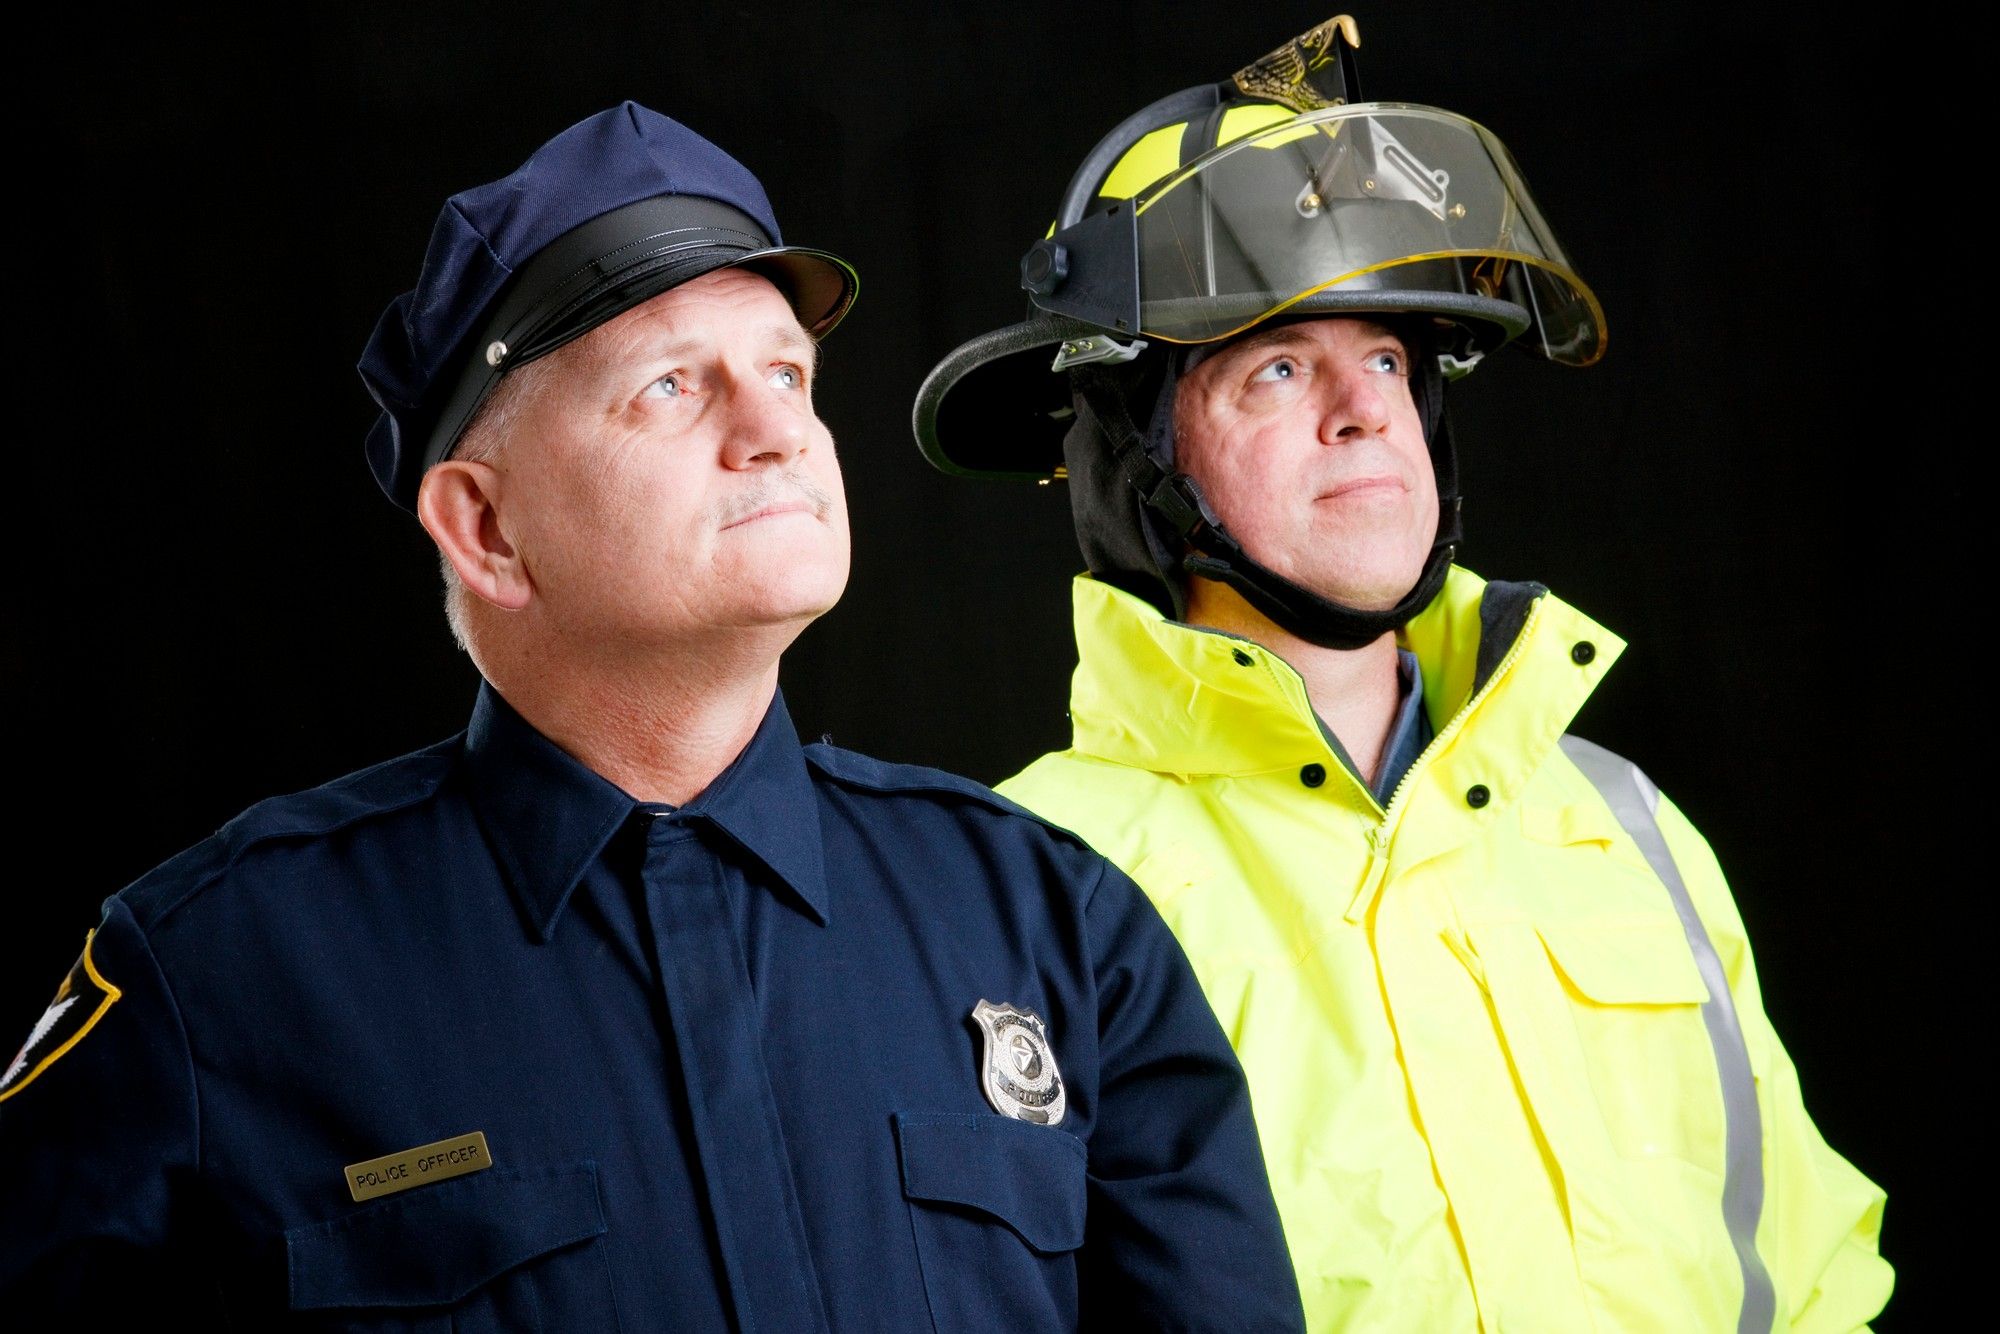 first responders and blue collar heroes